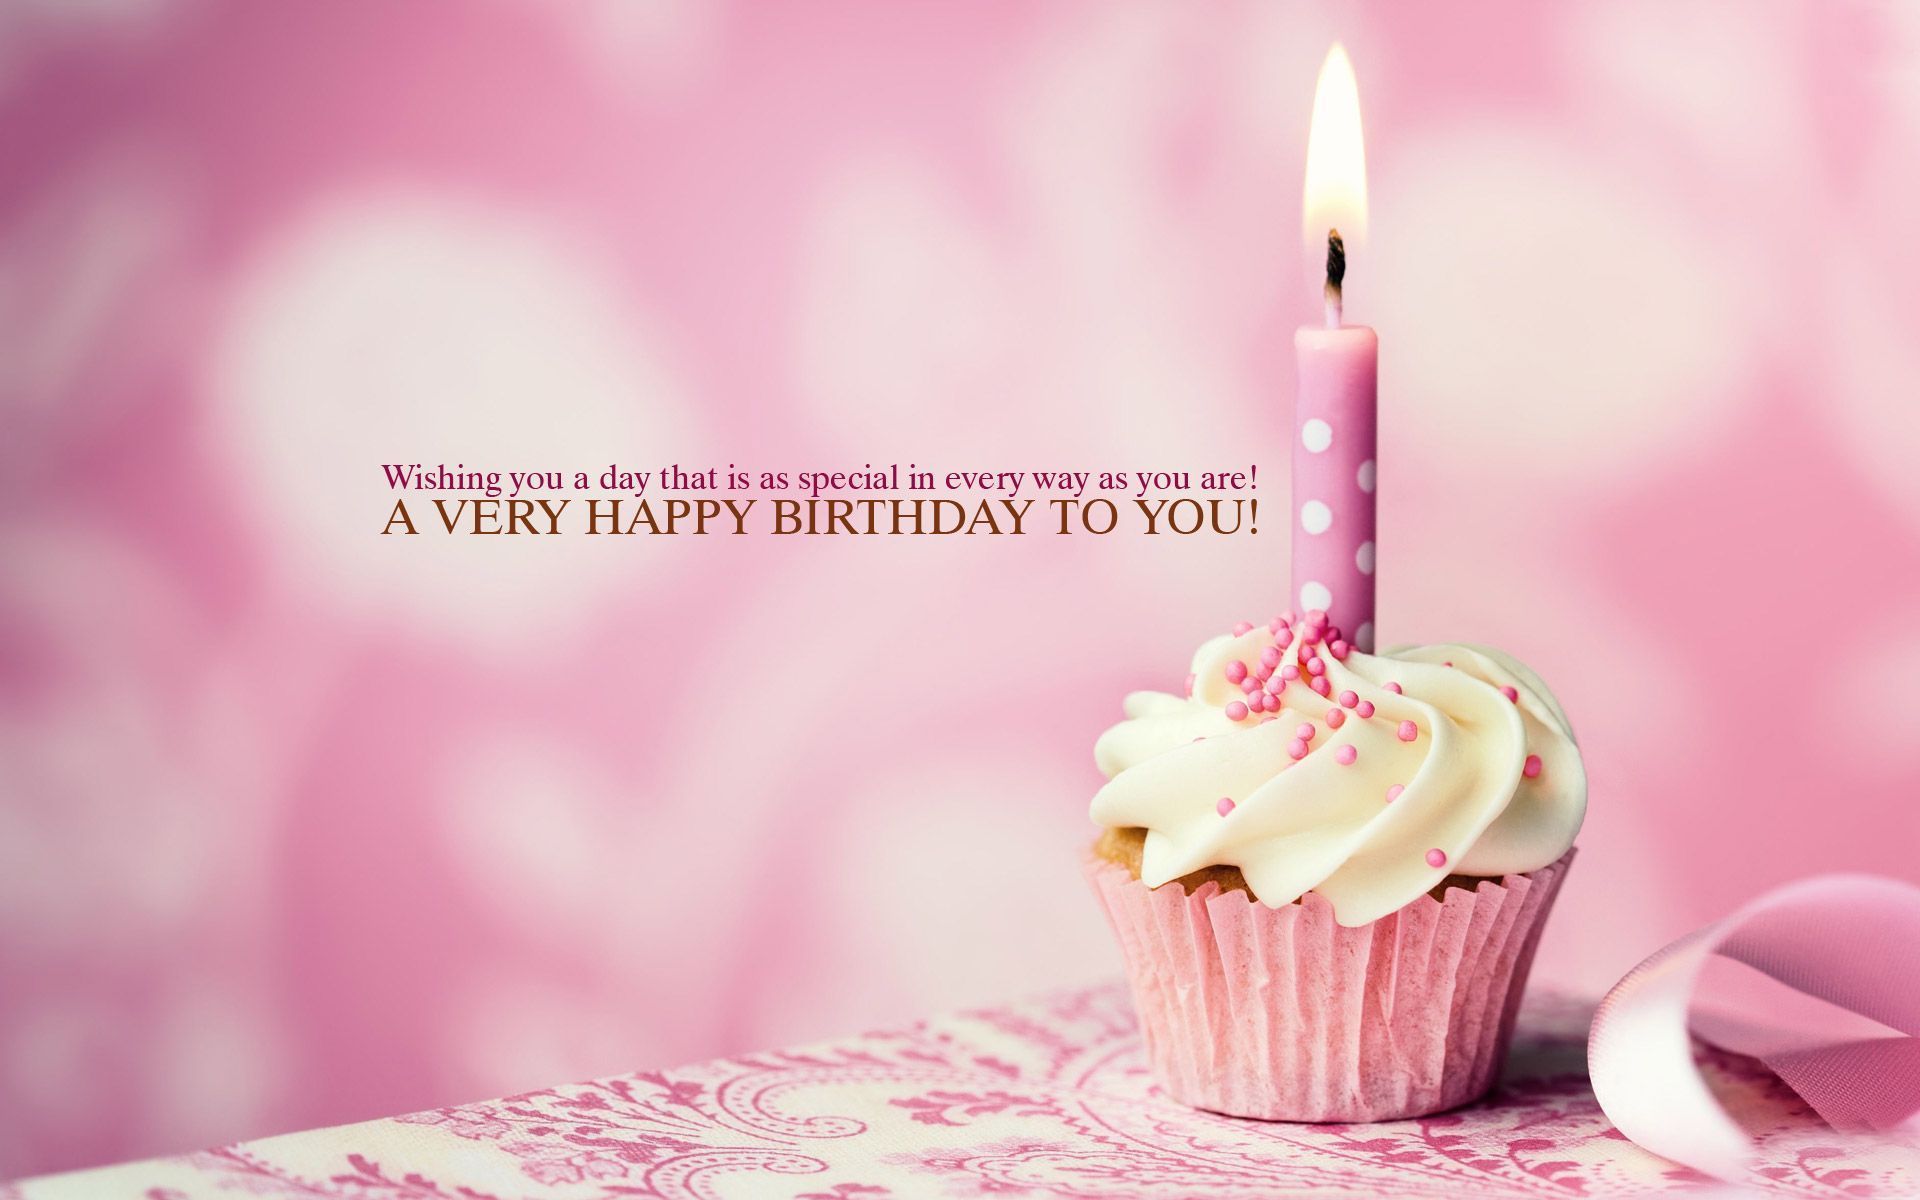 Gallery for - birthday wallpapers with quotes for friends